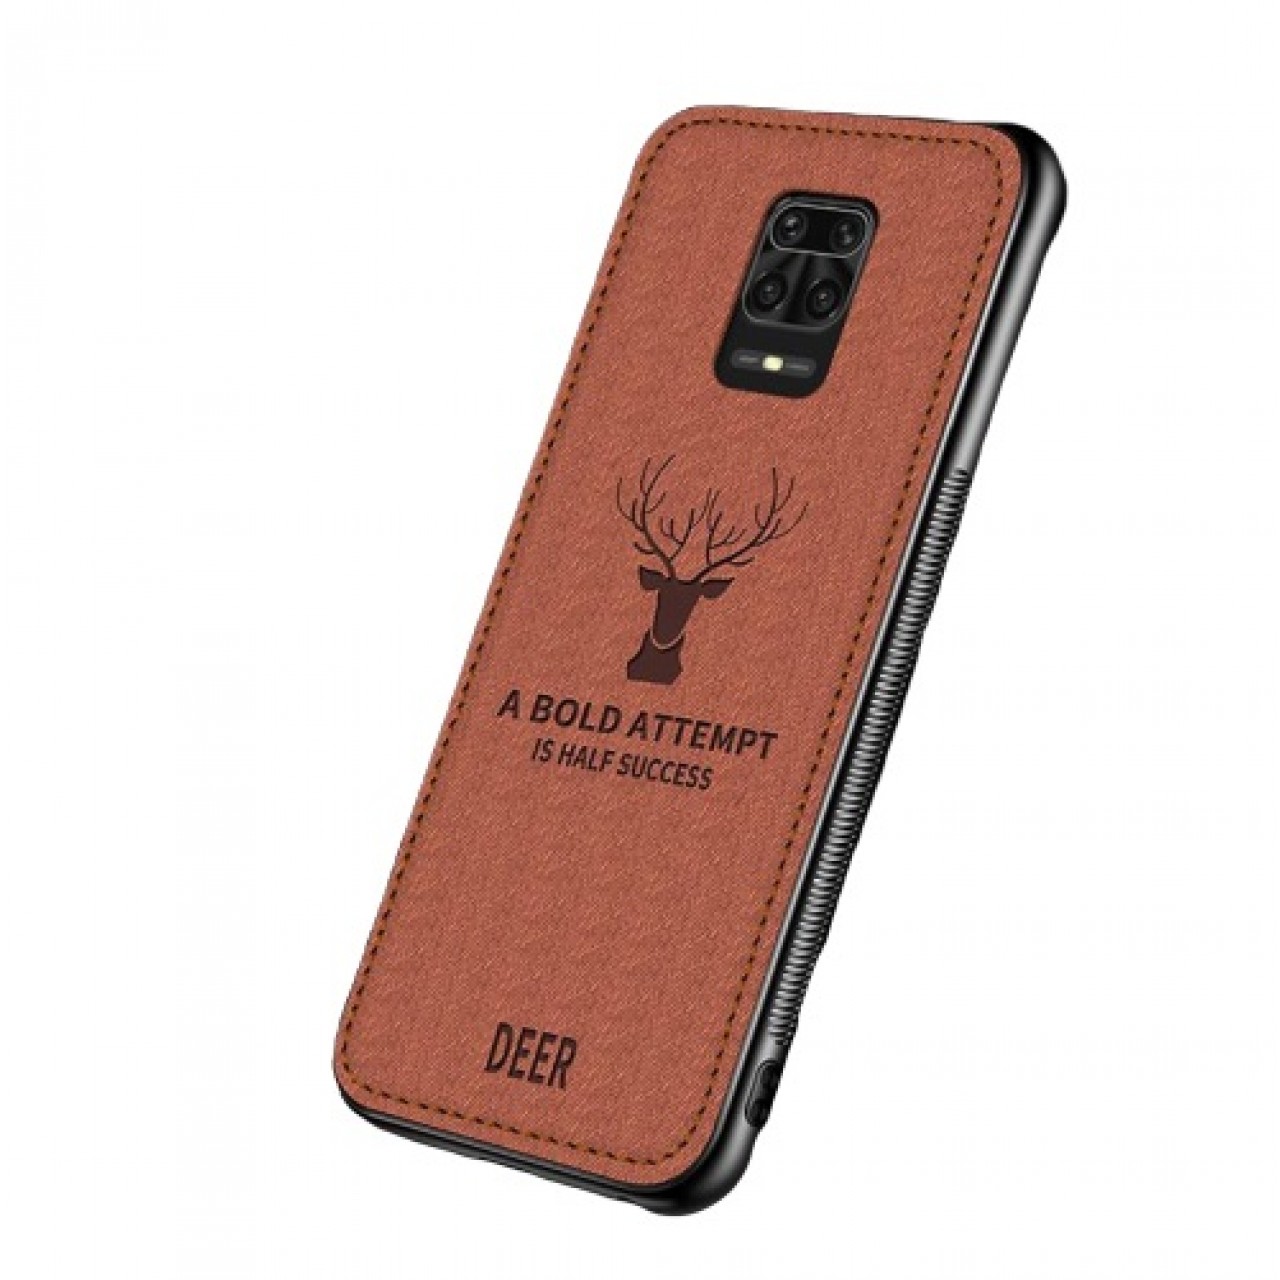 Deer cloth Back Case for Xiaomi Redmi Note 9 - Brown